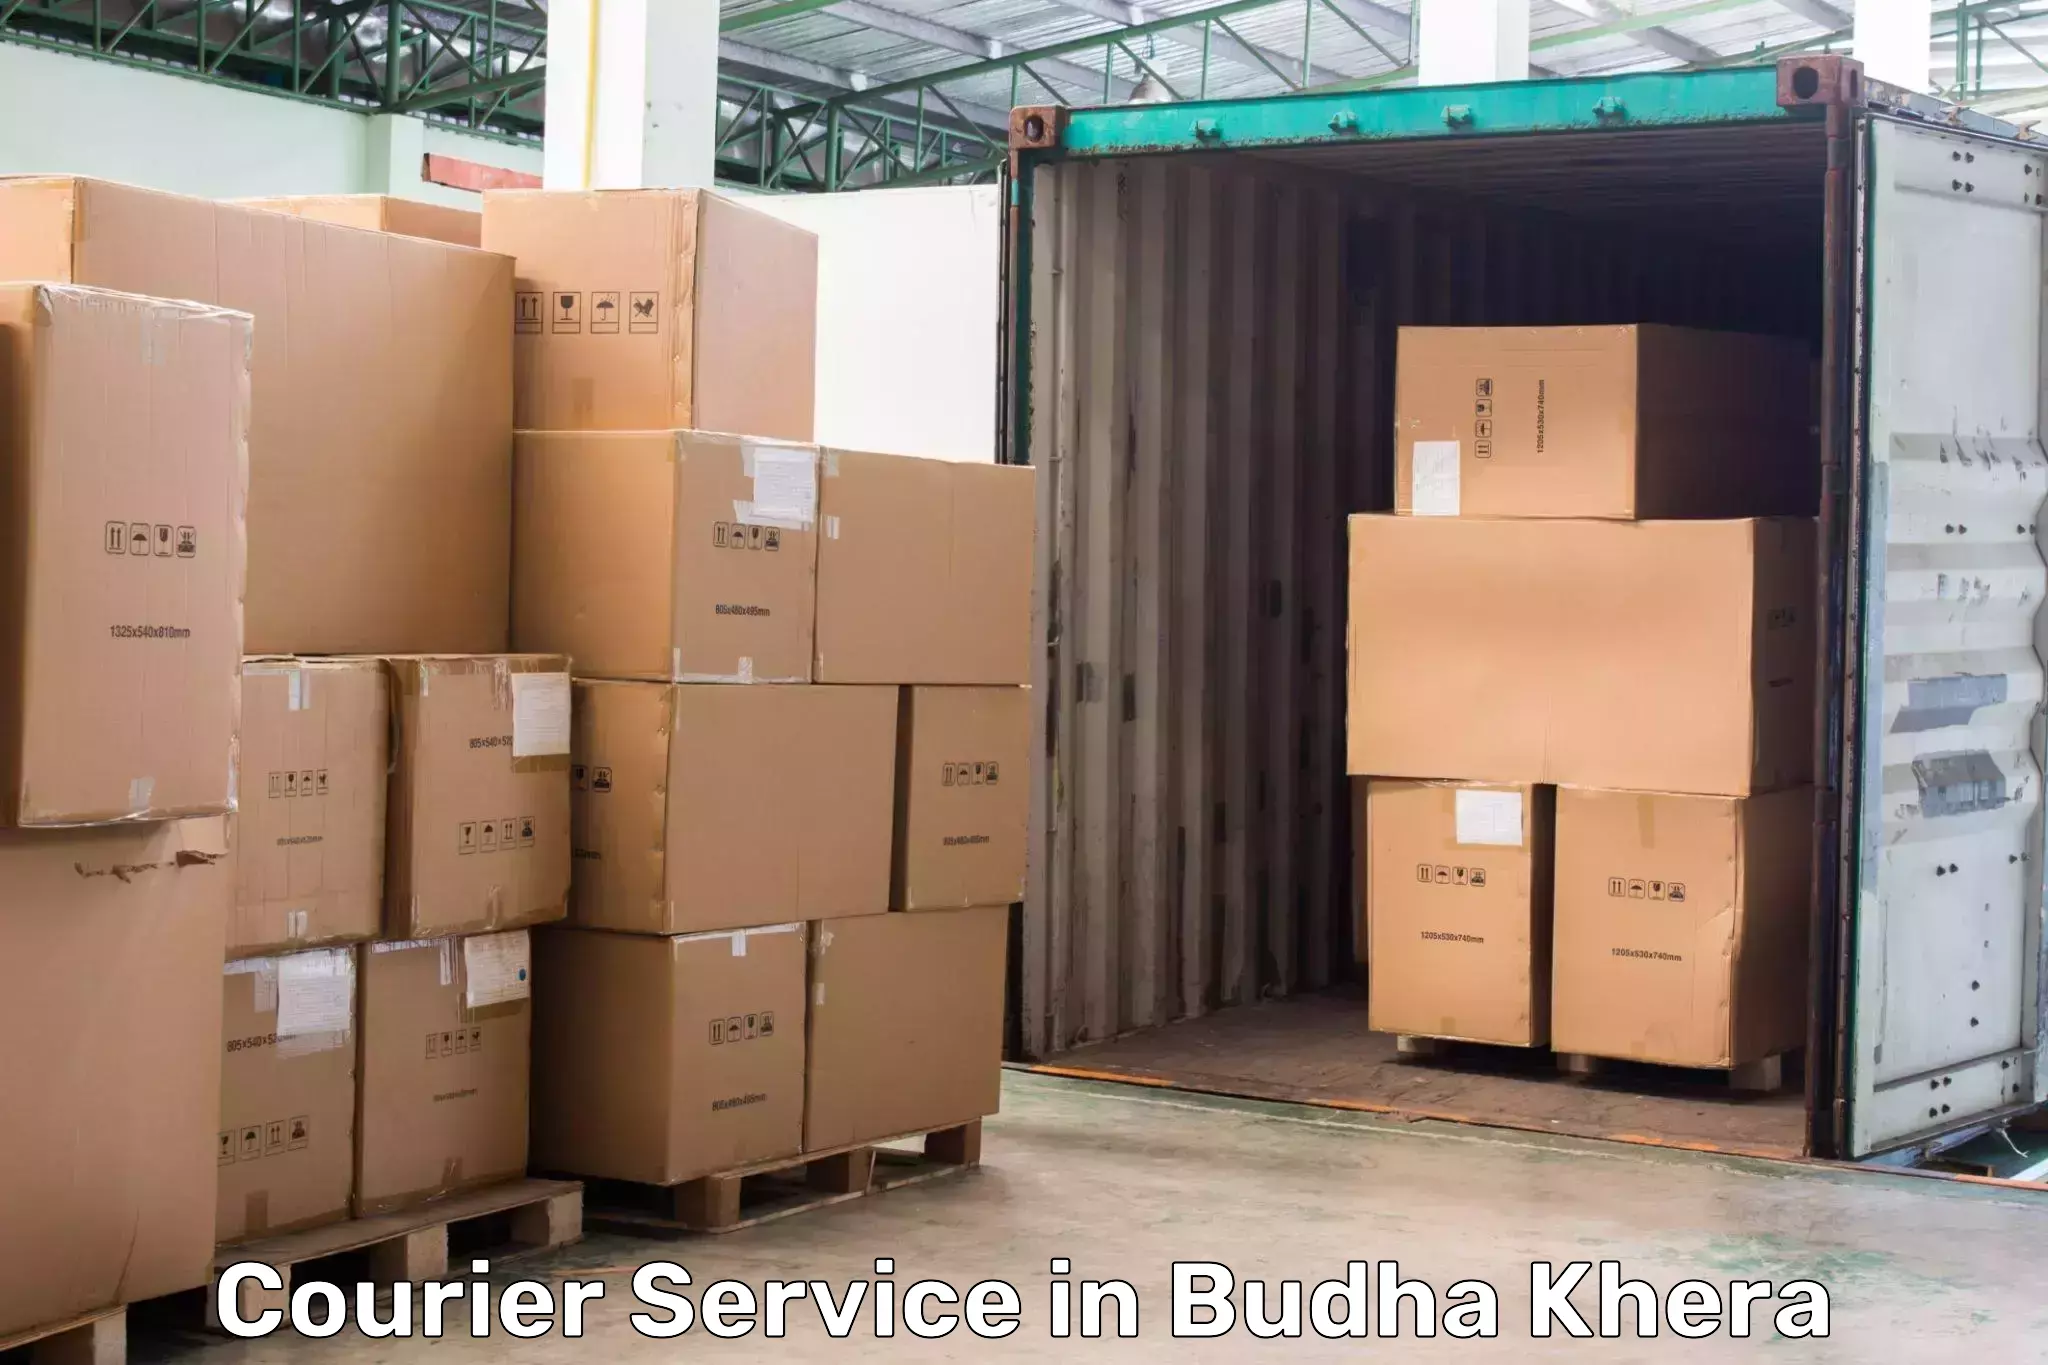 24/7 courier service in Budha Khera